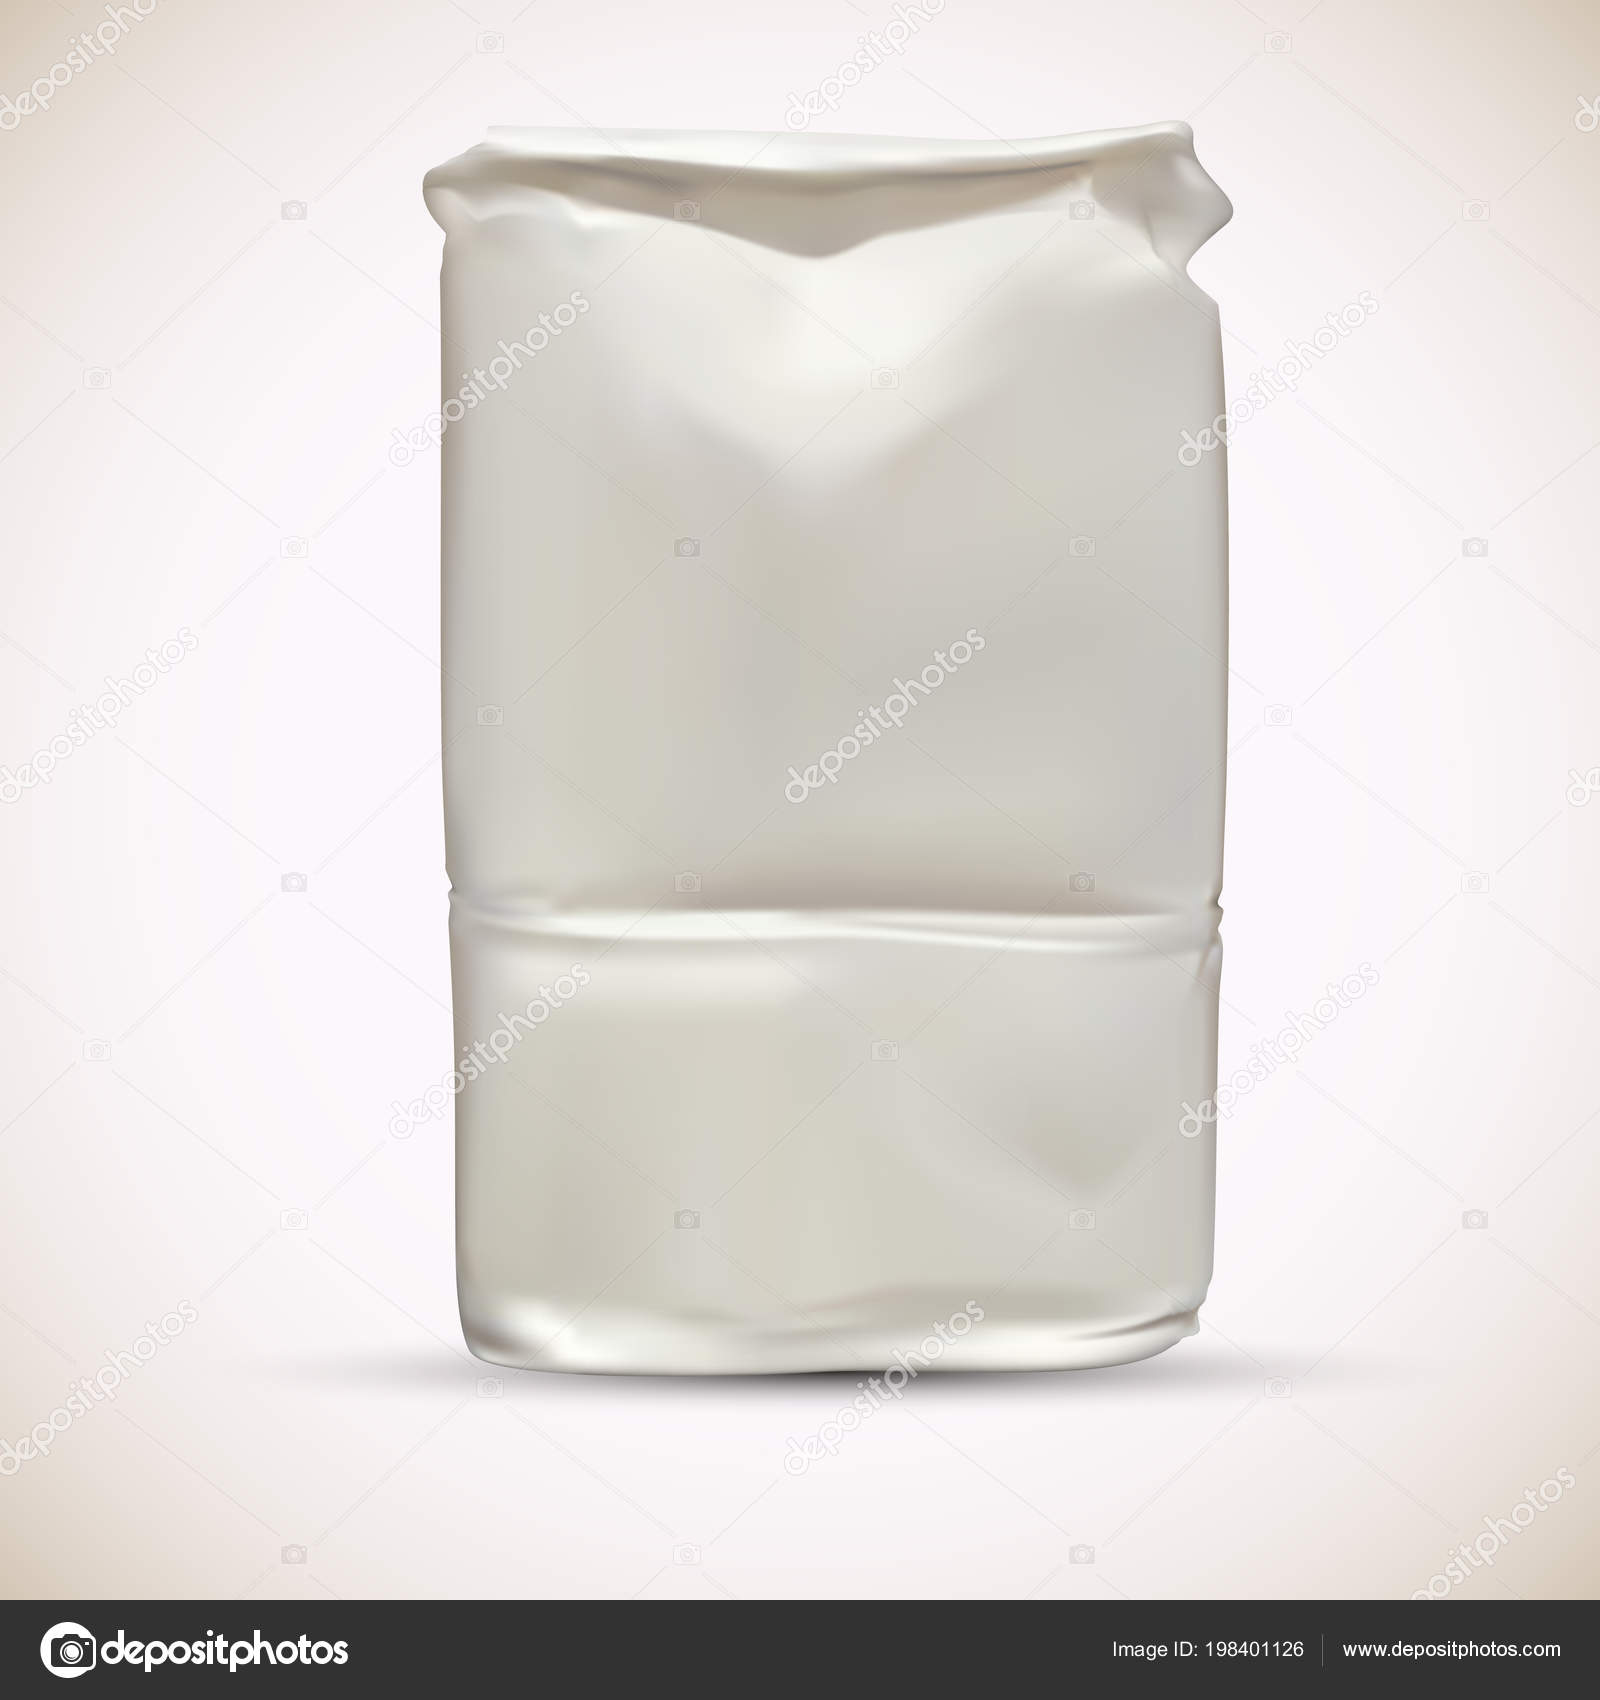 Download Blank Wheat Flour Paper Packaging Bag Vector Template Vector Image By C Tuulijumala Vector Stock 198401126